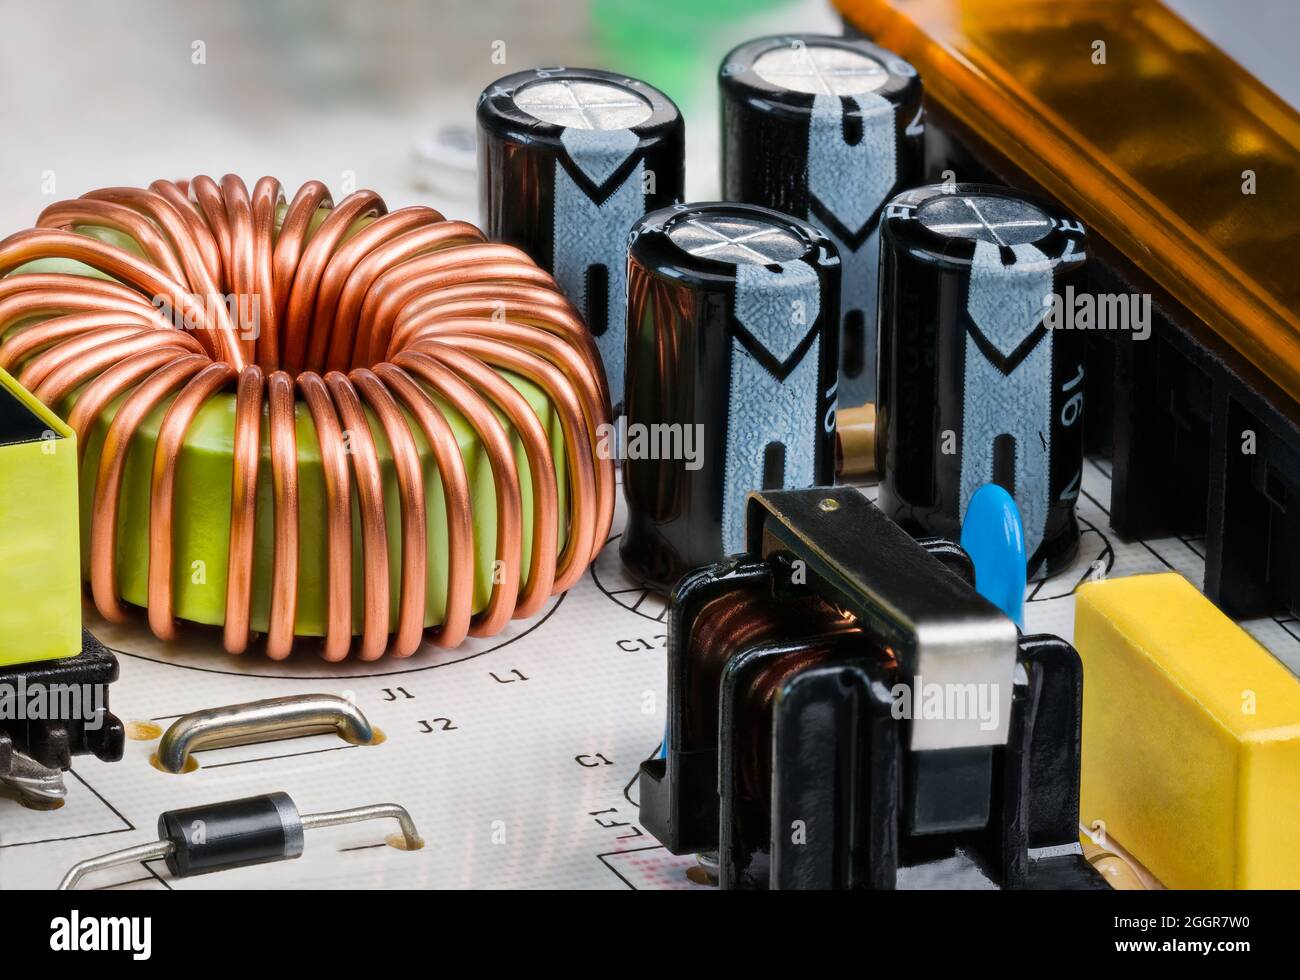 Toroidal core inductor, transformer or electrolytic capacitors on PCB detail. Electric components on printed circuit board of switch-mode power supply. Stock Photo